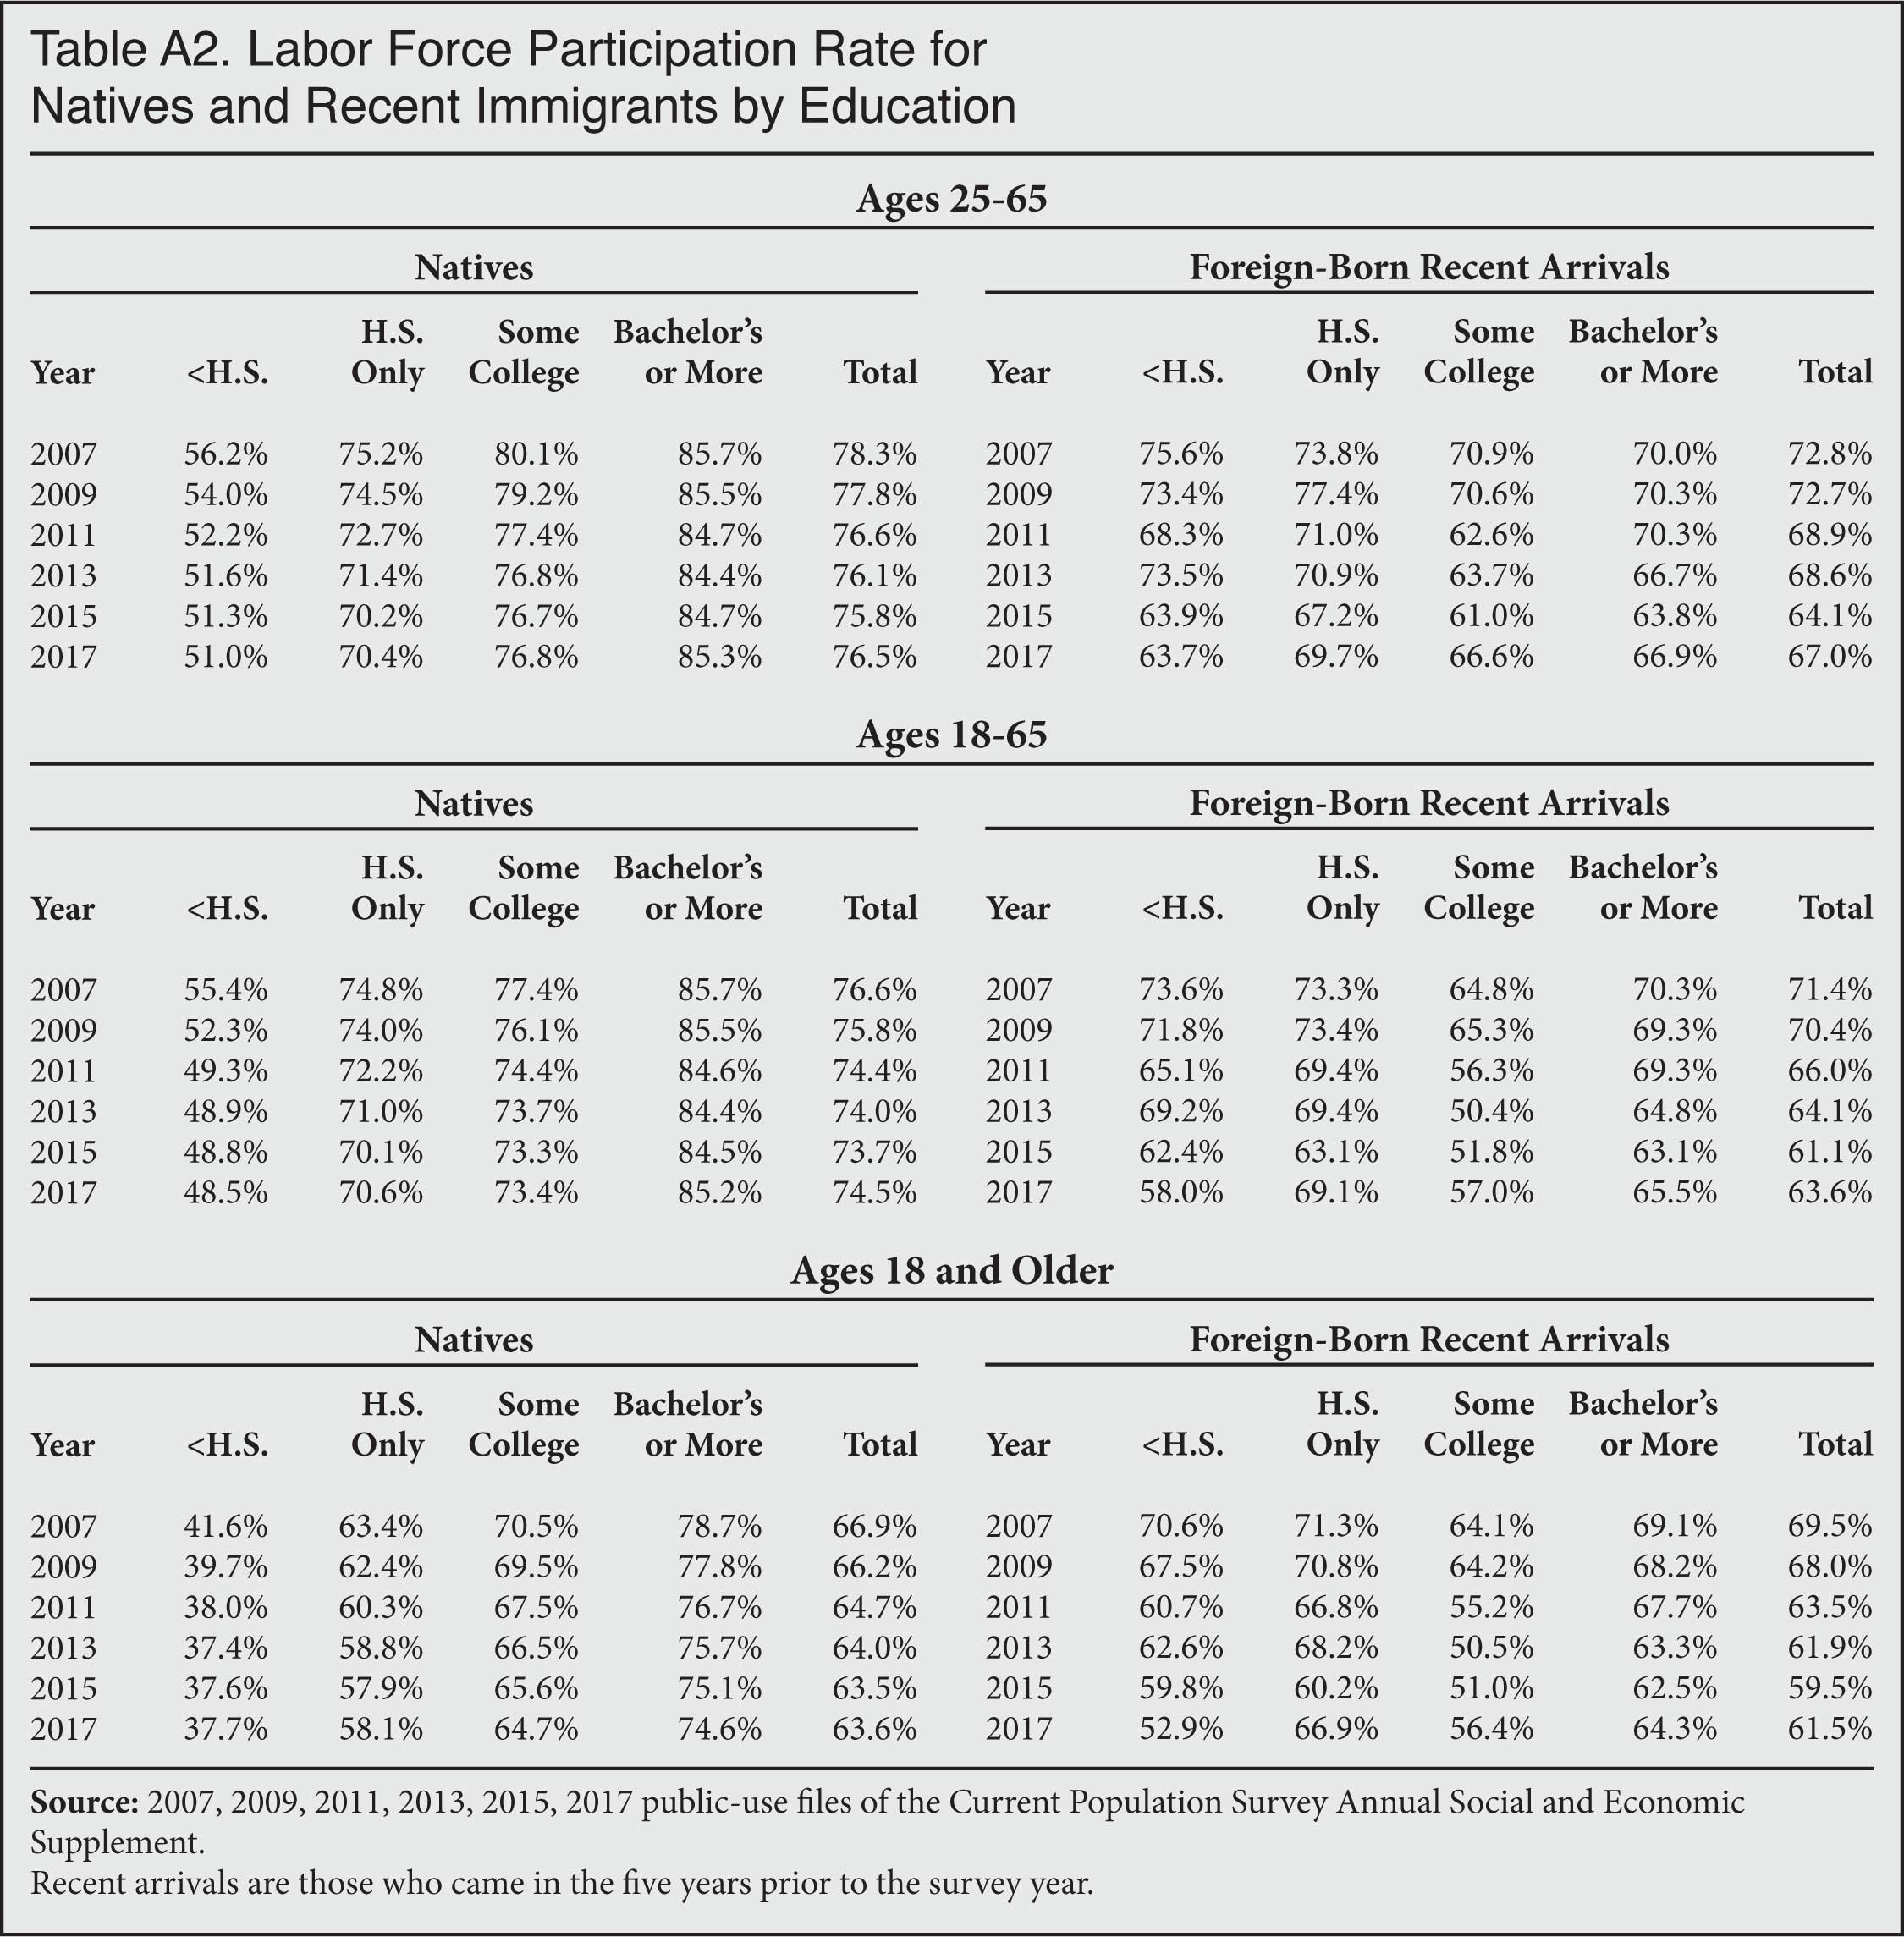 Table: Labor Force Participation Rate for Natives and Recent Immigrants by Education, 2007-2017